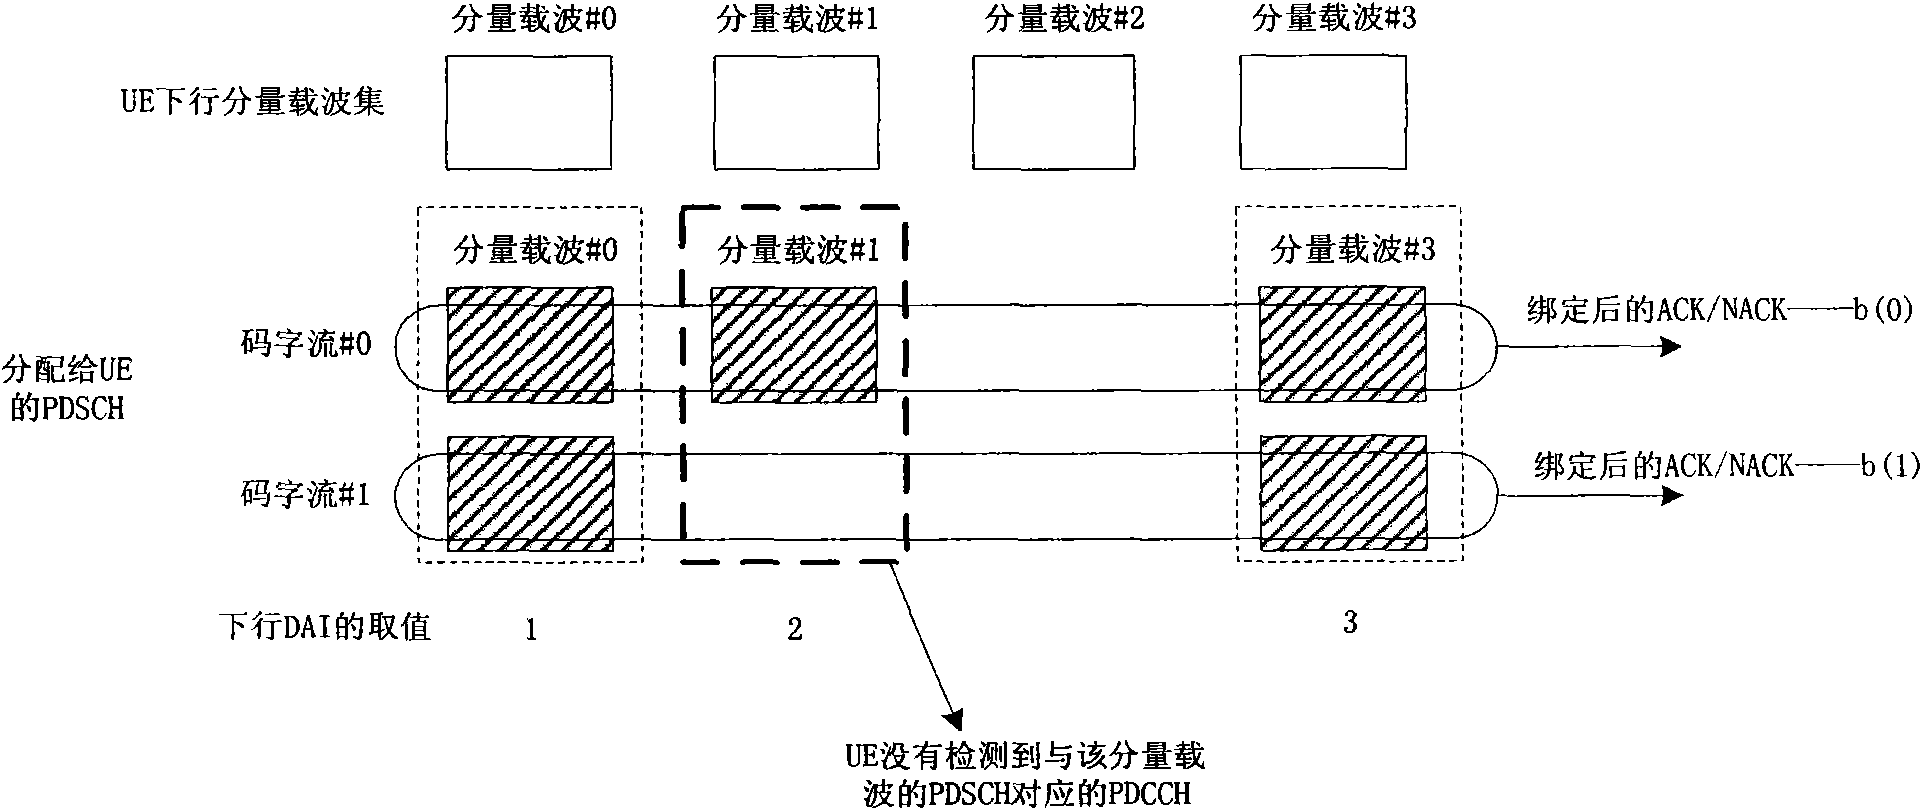 Multicarrier system and transmission method of correct/incorrect response information thereof